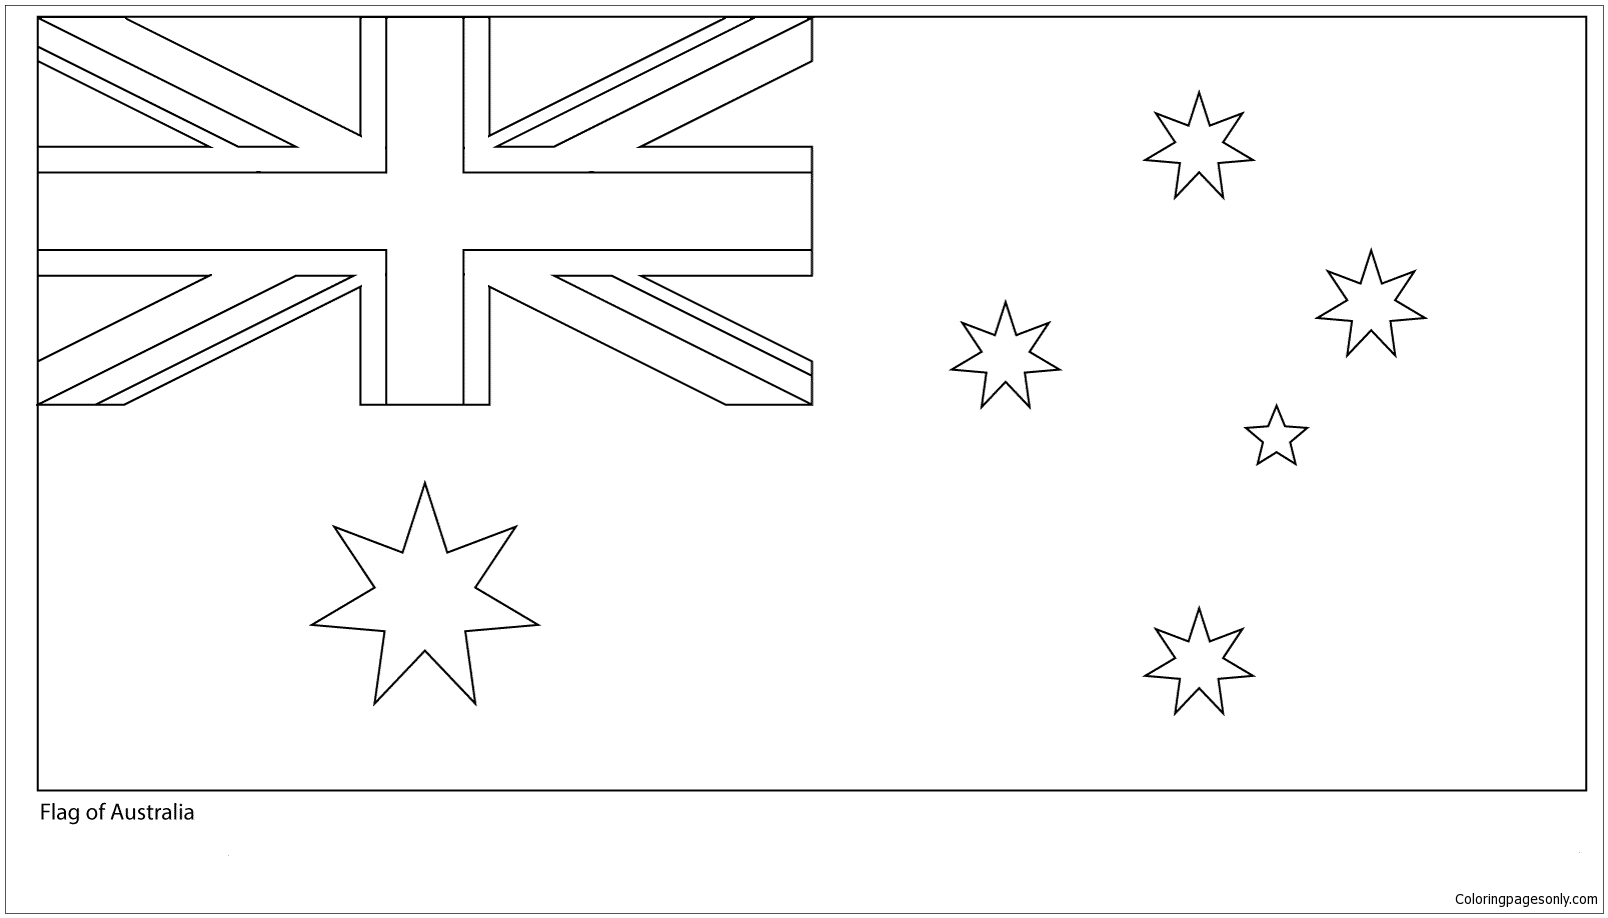 Download Flag of Australian-World Cup 2018 Coloring Page - Free Coloring Pages Online